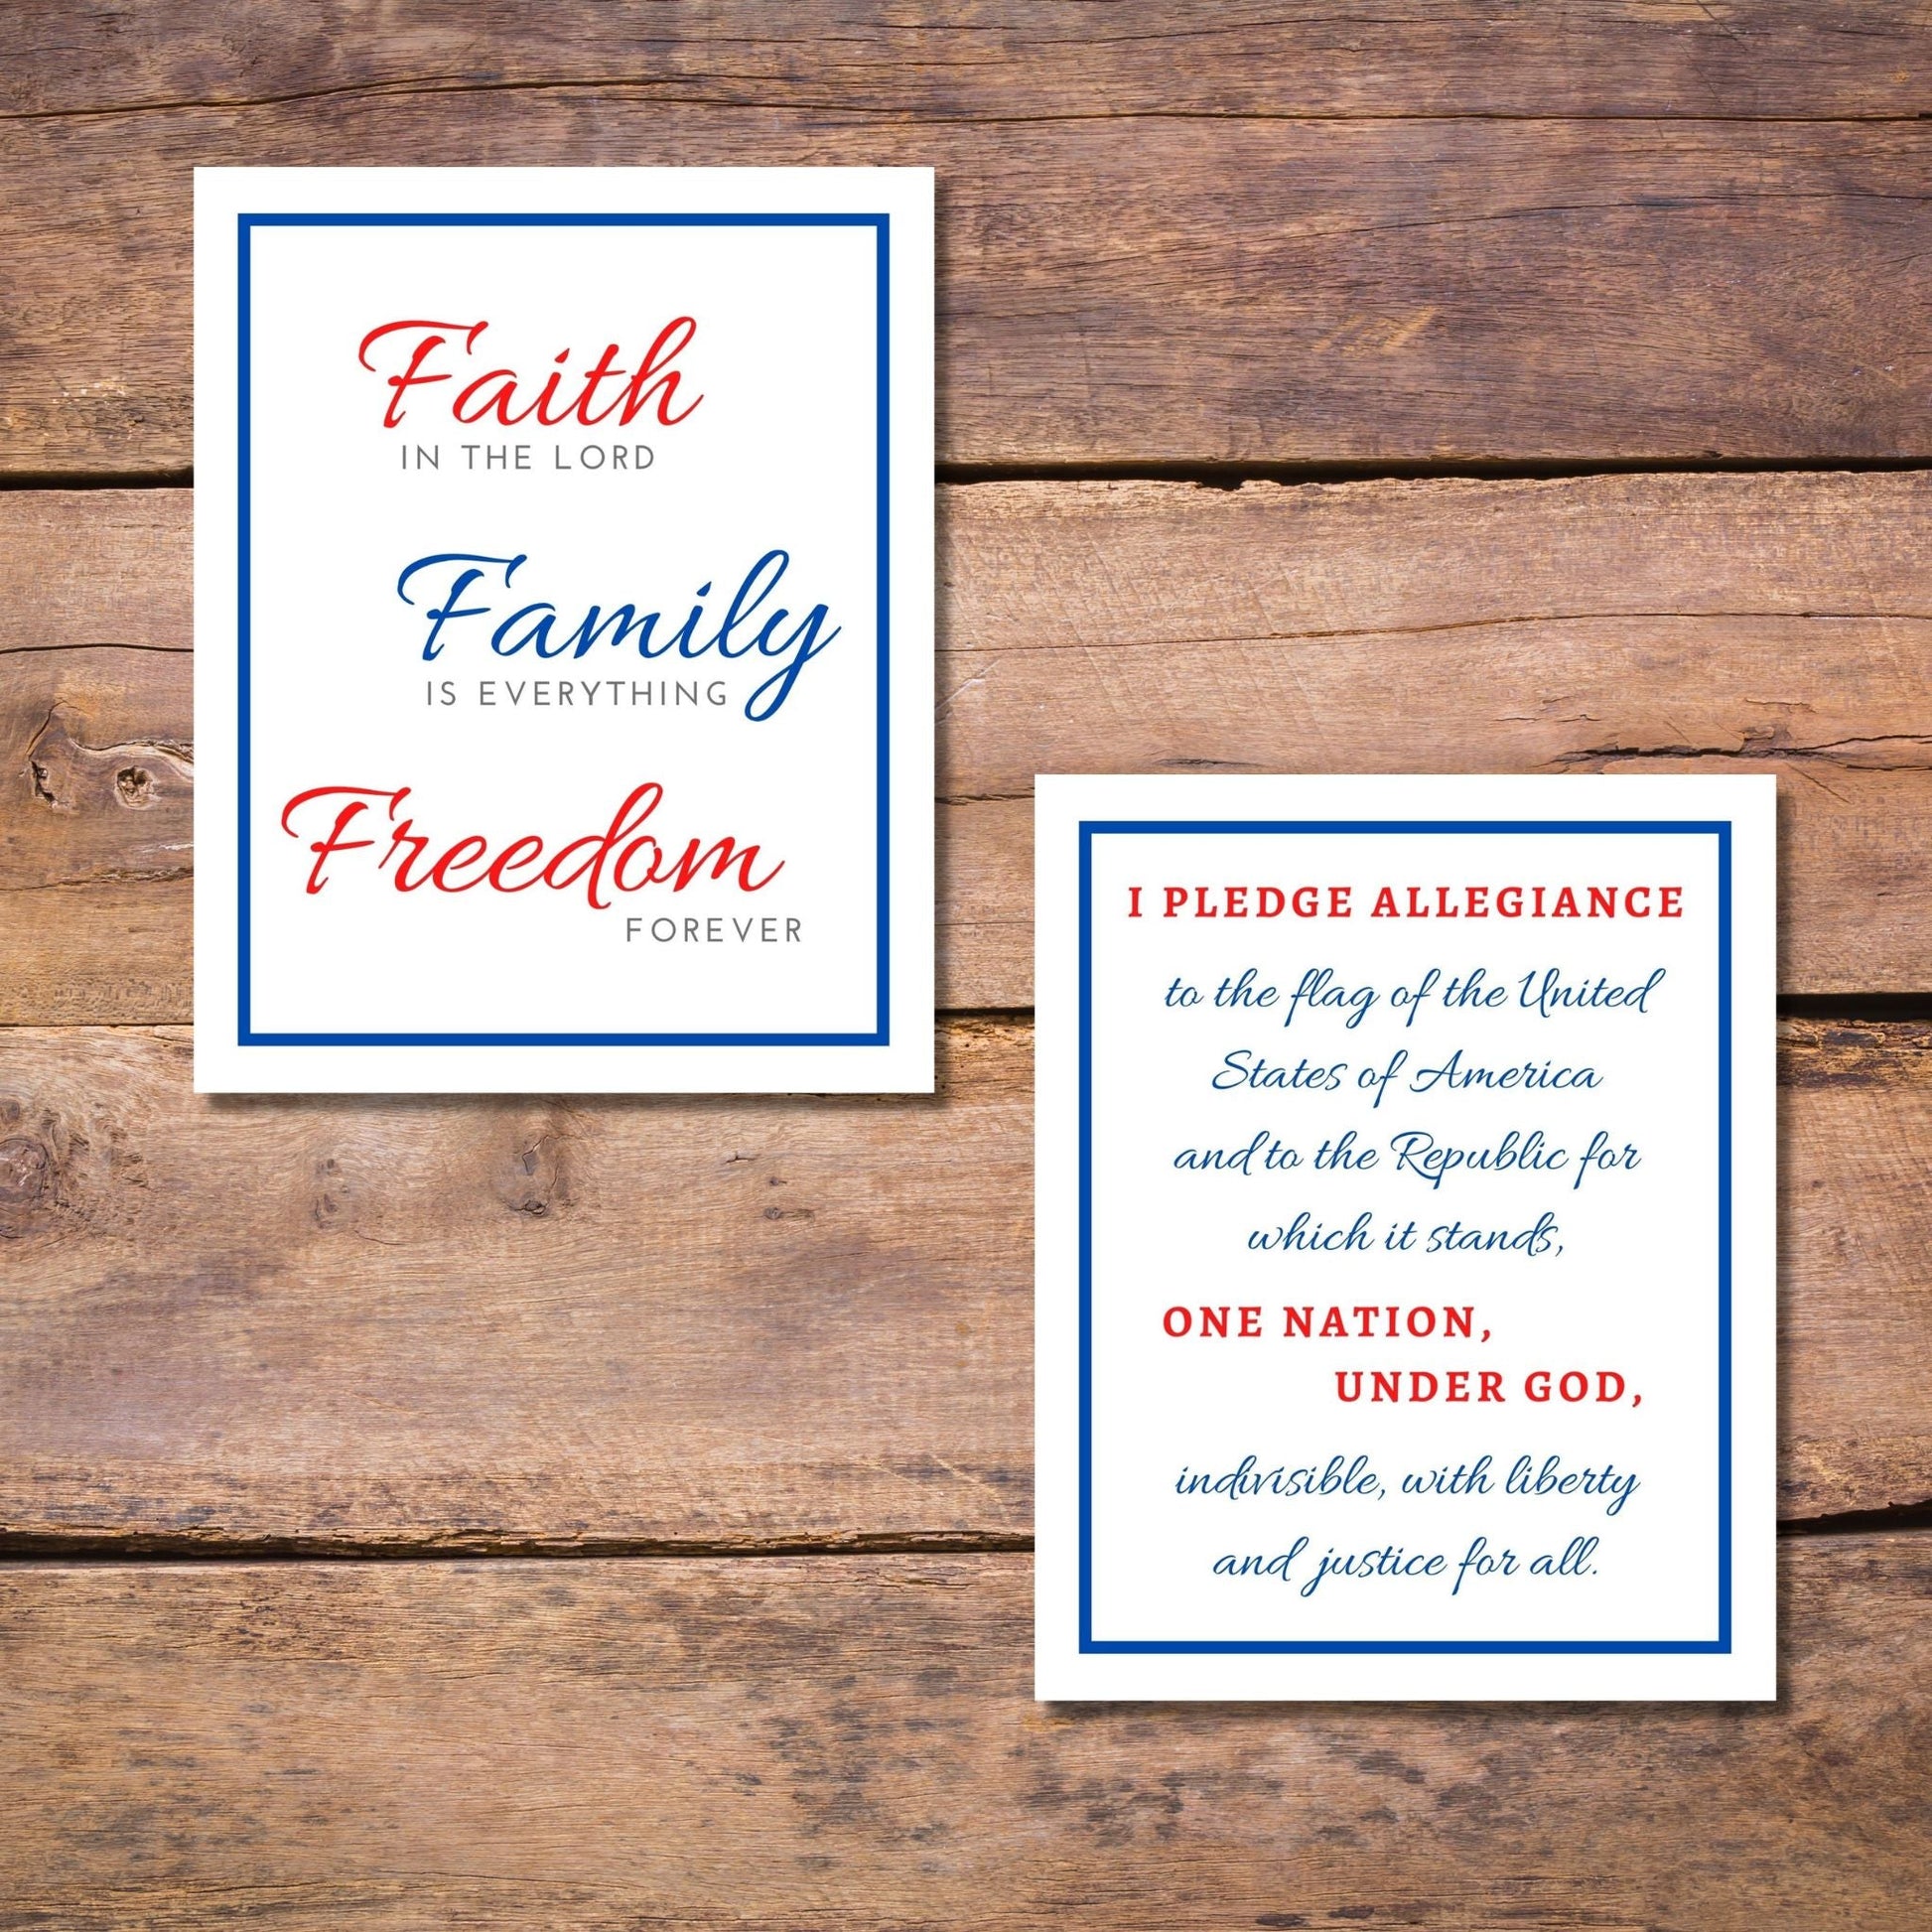 Inspirational Word Art Faith Family Freedom reads... Faith IN THE LORD Family IS EVERYTHING Freedom FOREVER | Shown with Patriotic Word Art - Pledge of Allegiance that reads… I PLEDGE ALLEGIANCE to the flag of the United States of America and to the Republic for which it stands, ONE NATION, UNDER GOD, indivisible, with liberty and justice for all. | Both shown in Color – Red, White, and Blue with Blue Border | oak7west.com